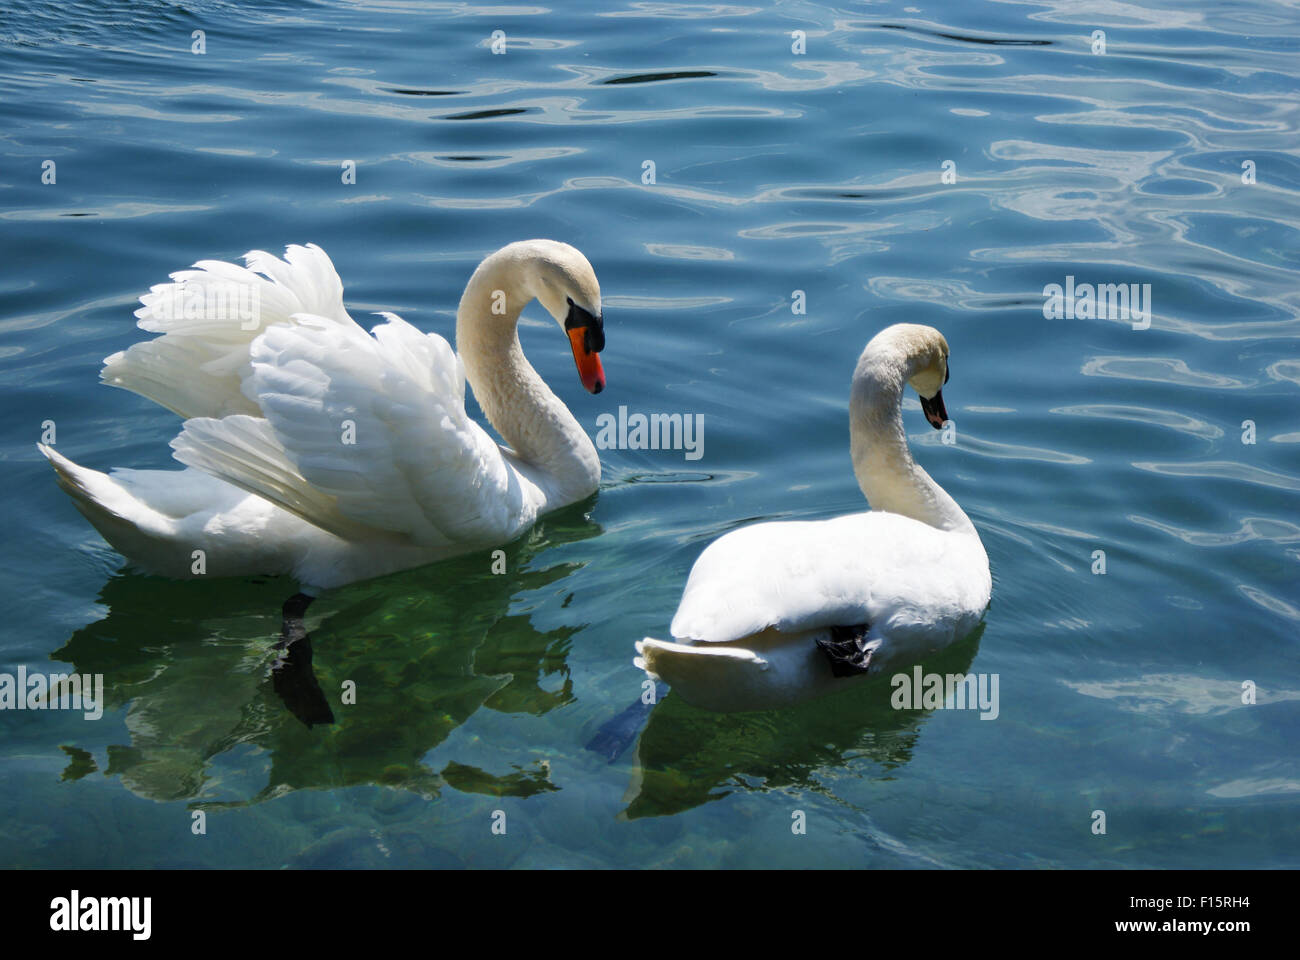 Two swans on a lake, one spreading its wings Stock Photo